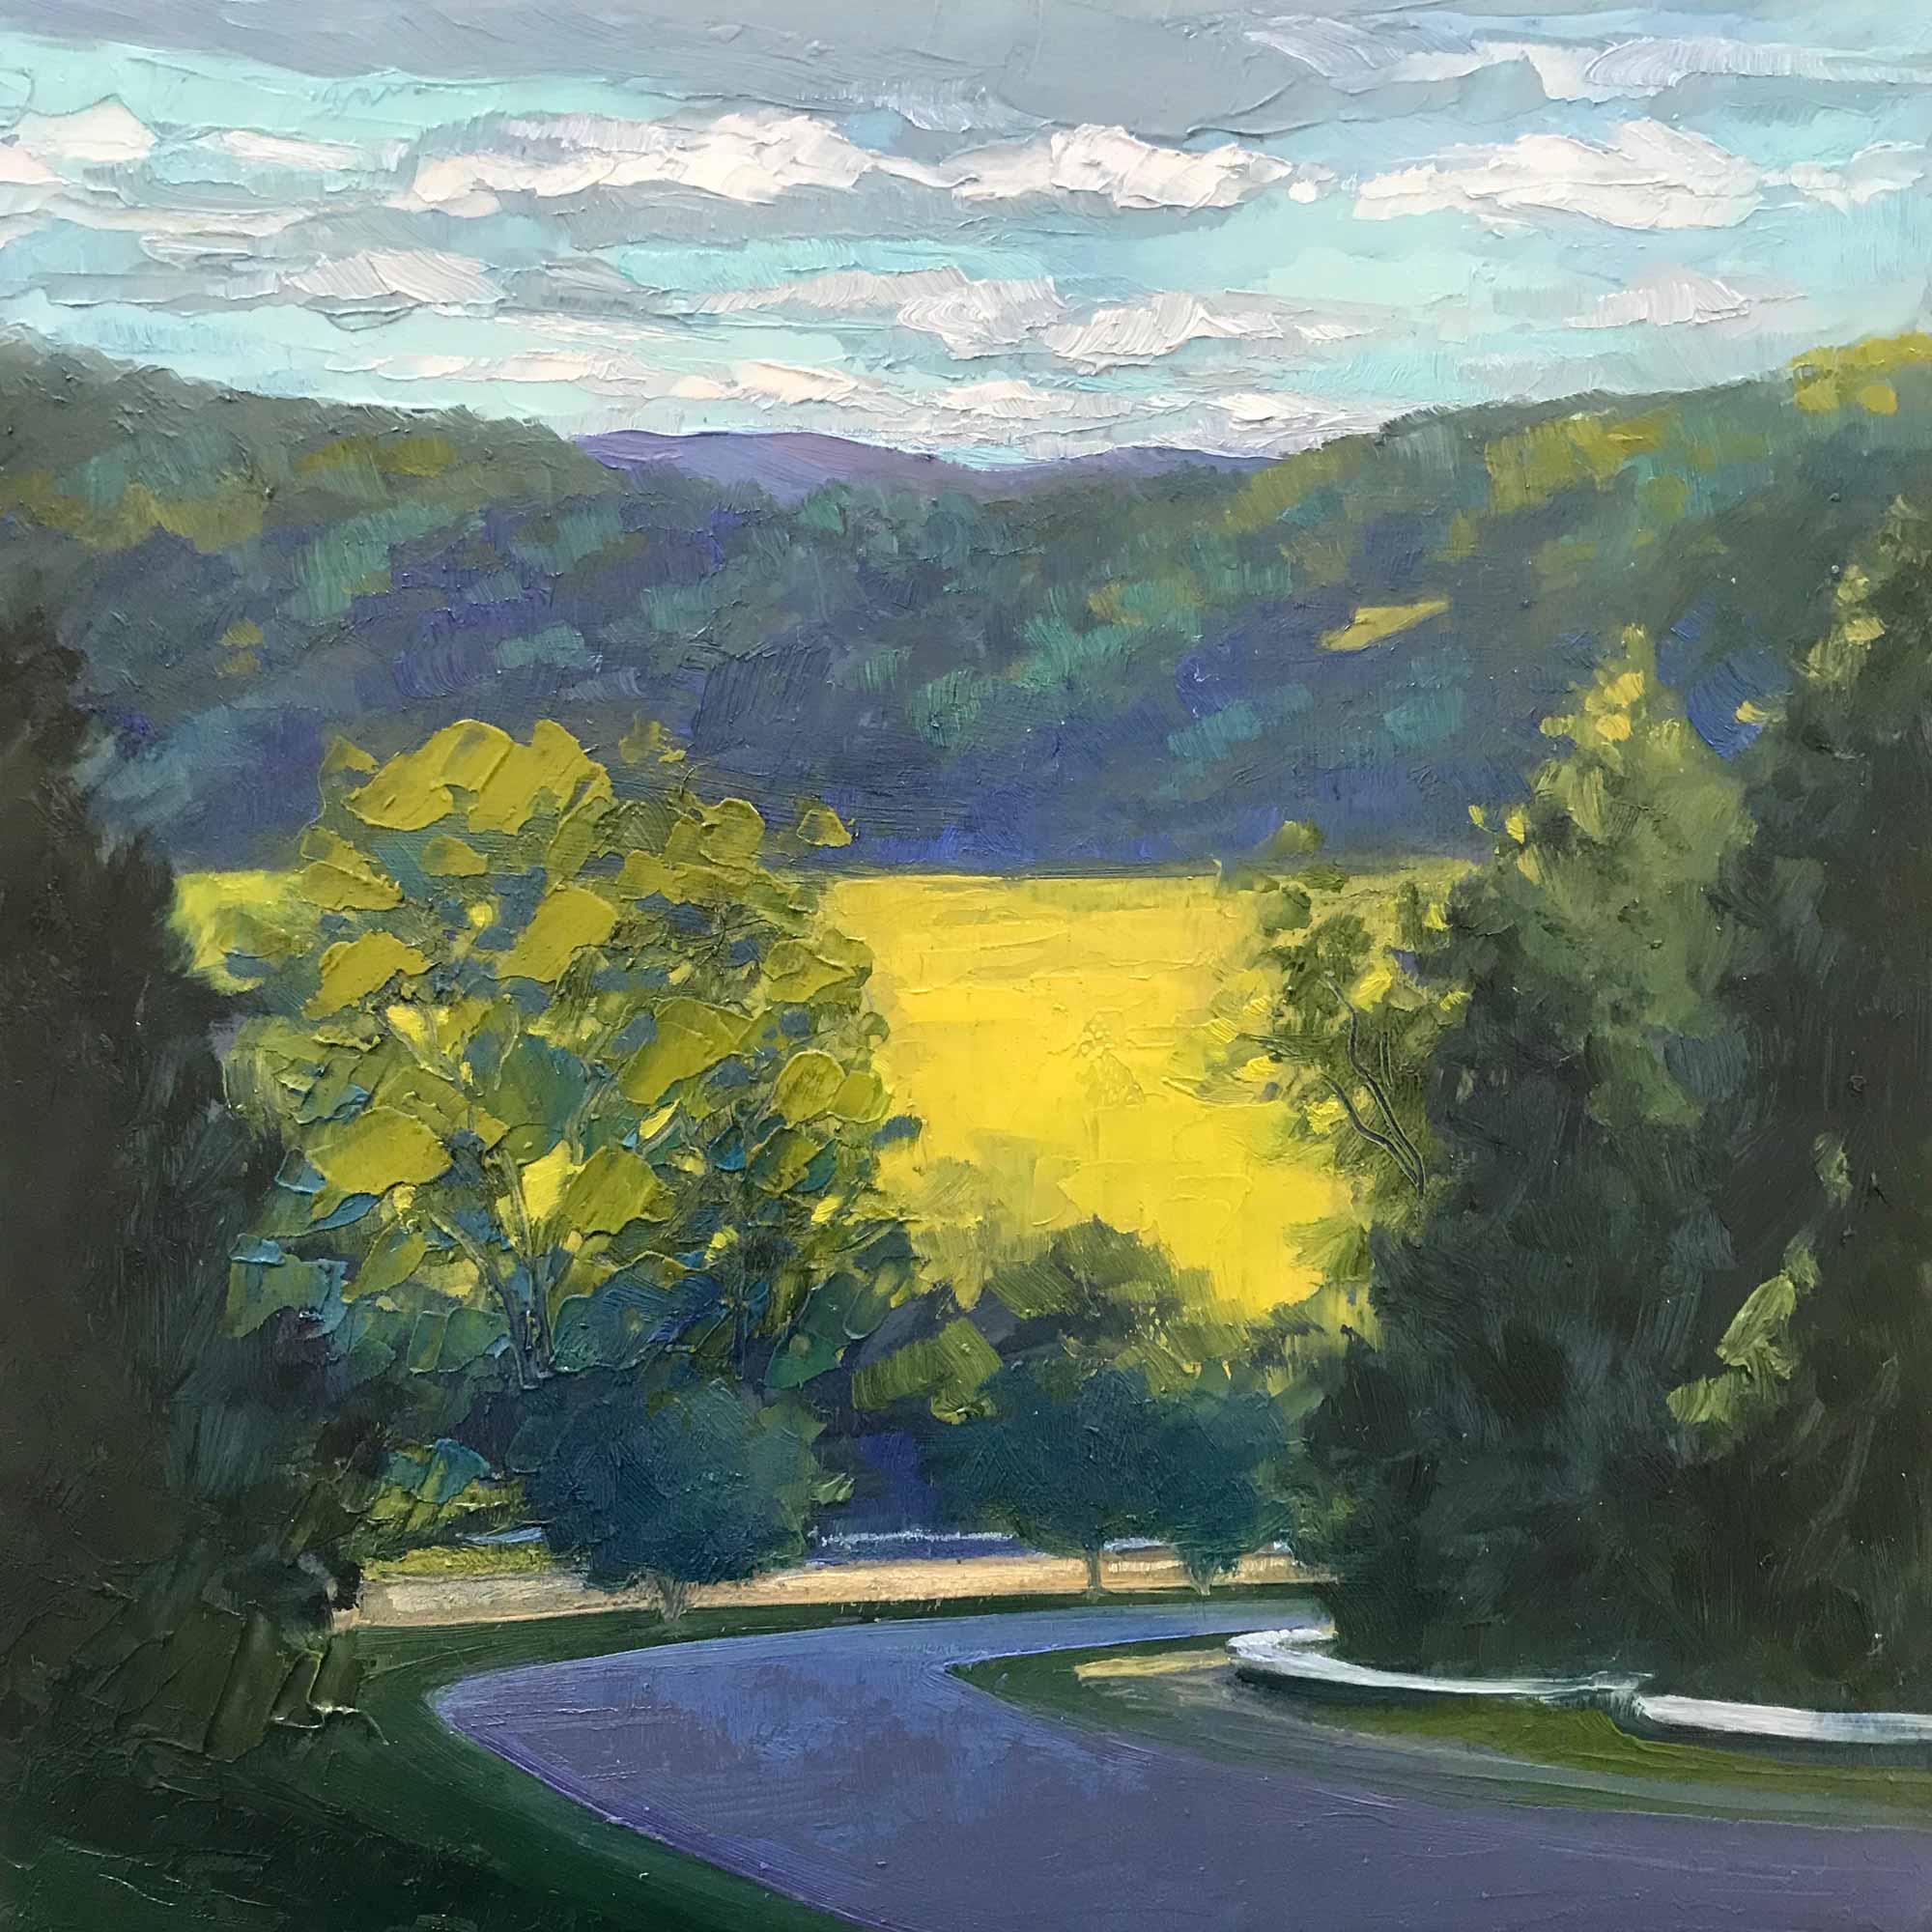 View from the Ridge No. 44, oil on panel, 8 x 8 inches, 2019